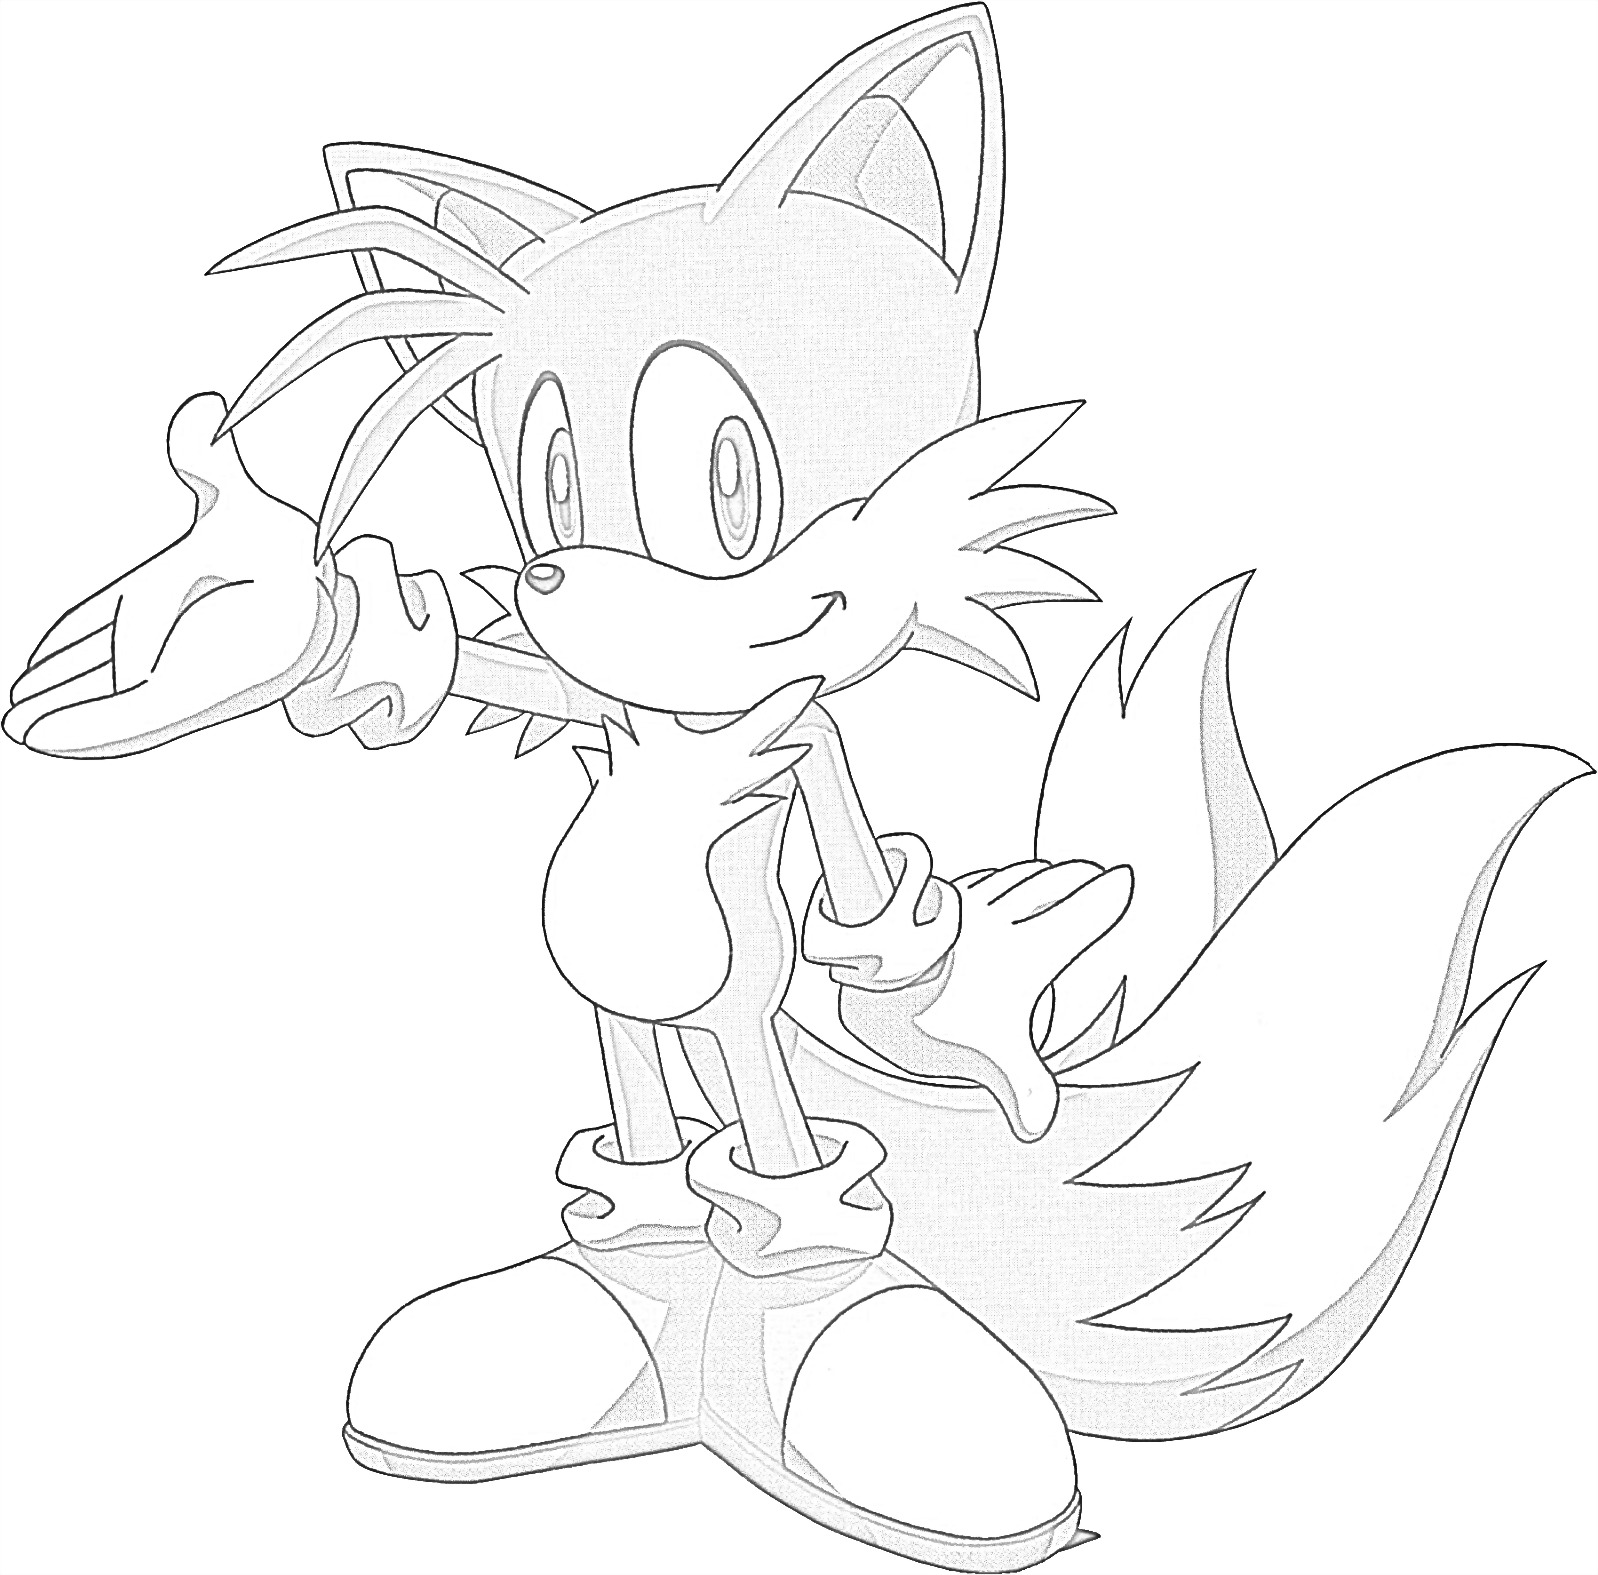 Sonic x tails coloring page by s on